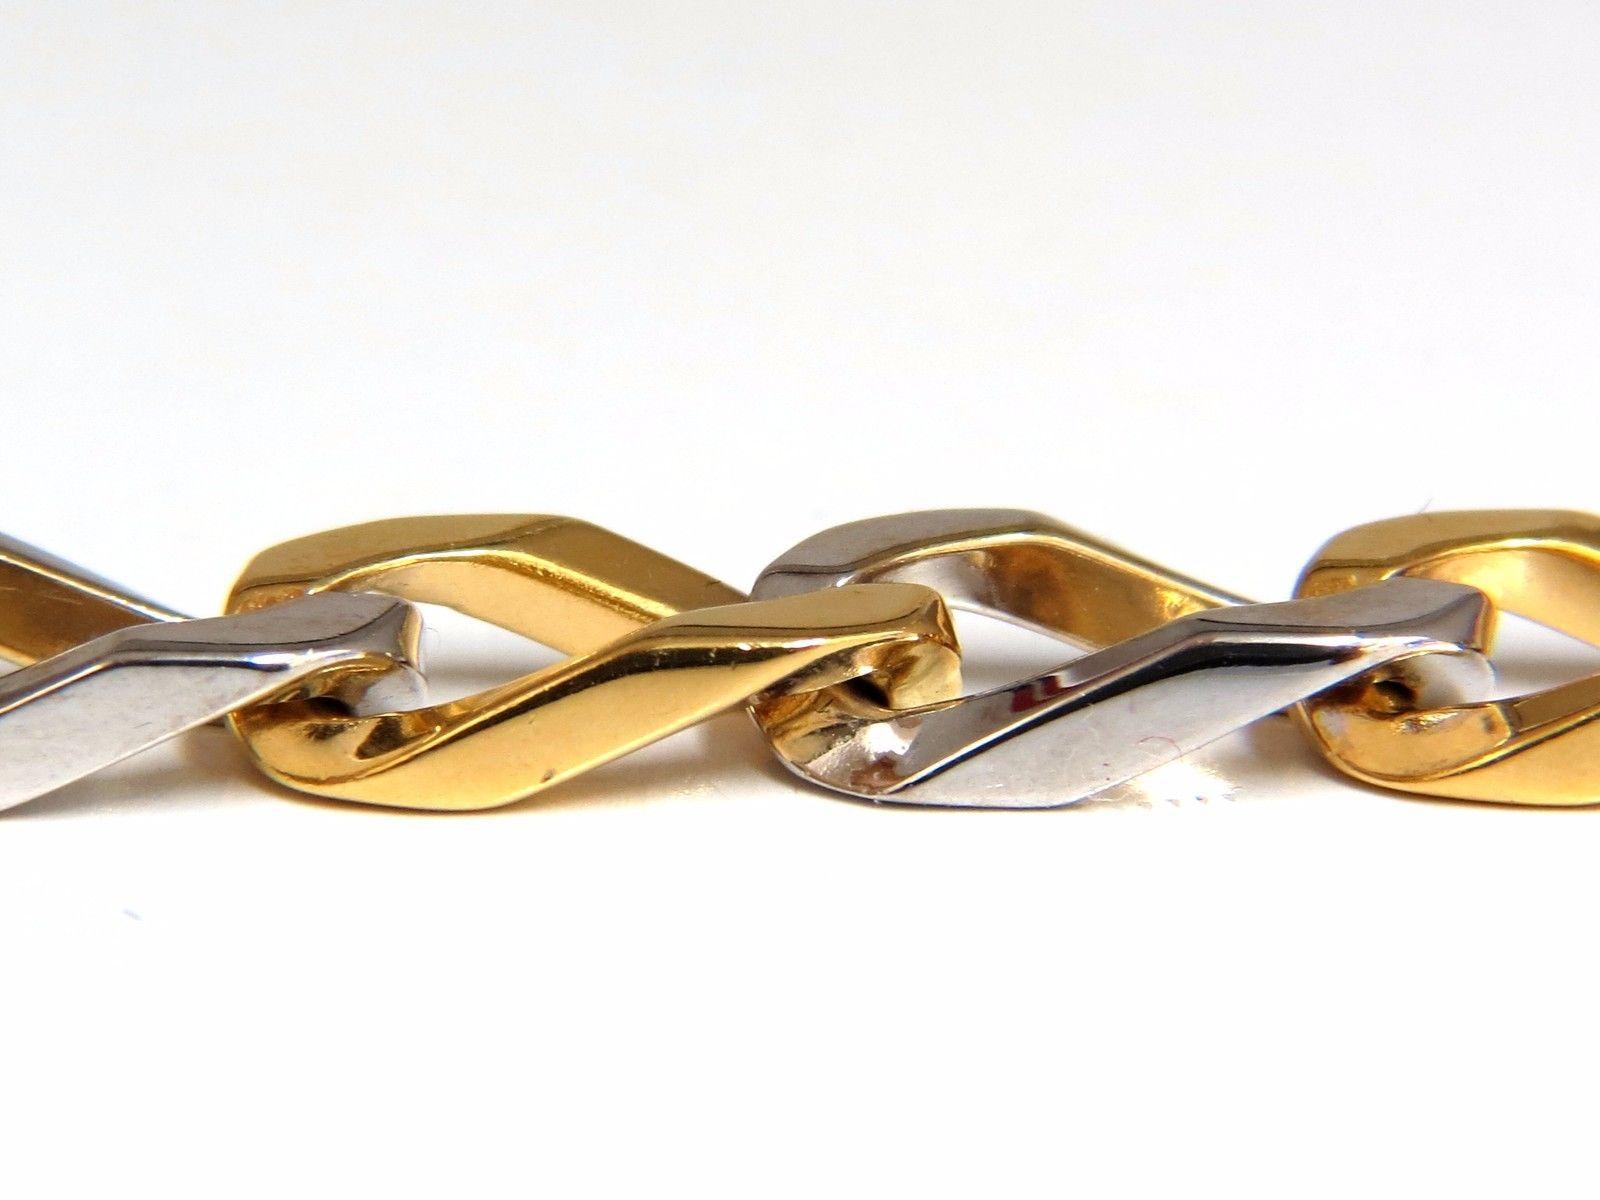 Elongated Curb Link

Unisex Bracelet

Smooth & High Shine

Two Toned

7.5 inch / wearable length

21.3 Grams.

6.6mm wide links

14kt Yellow Gold.

Secure & Comfortable clasp